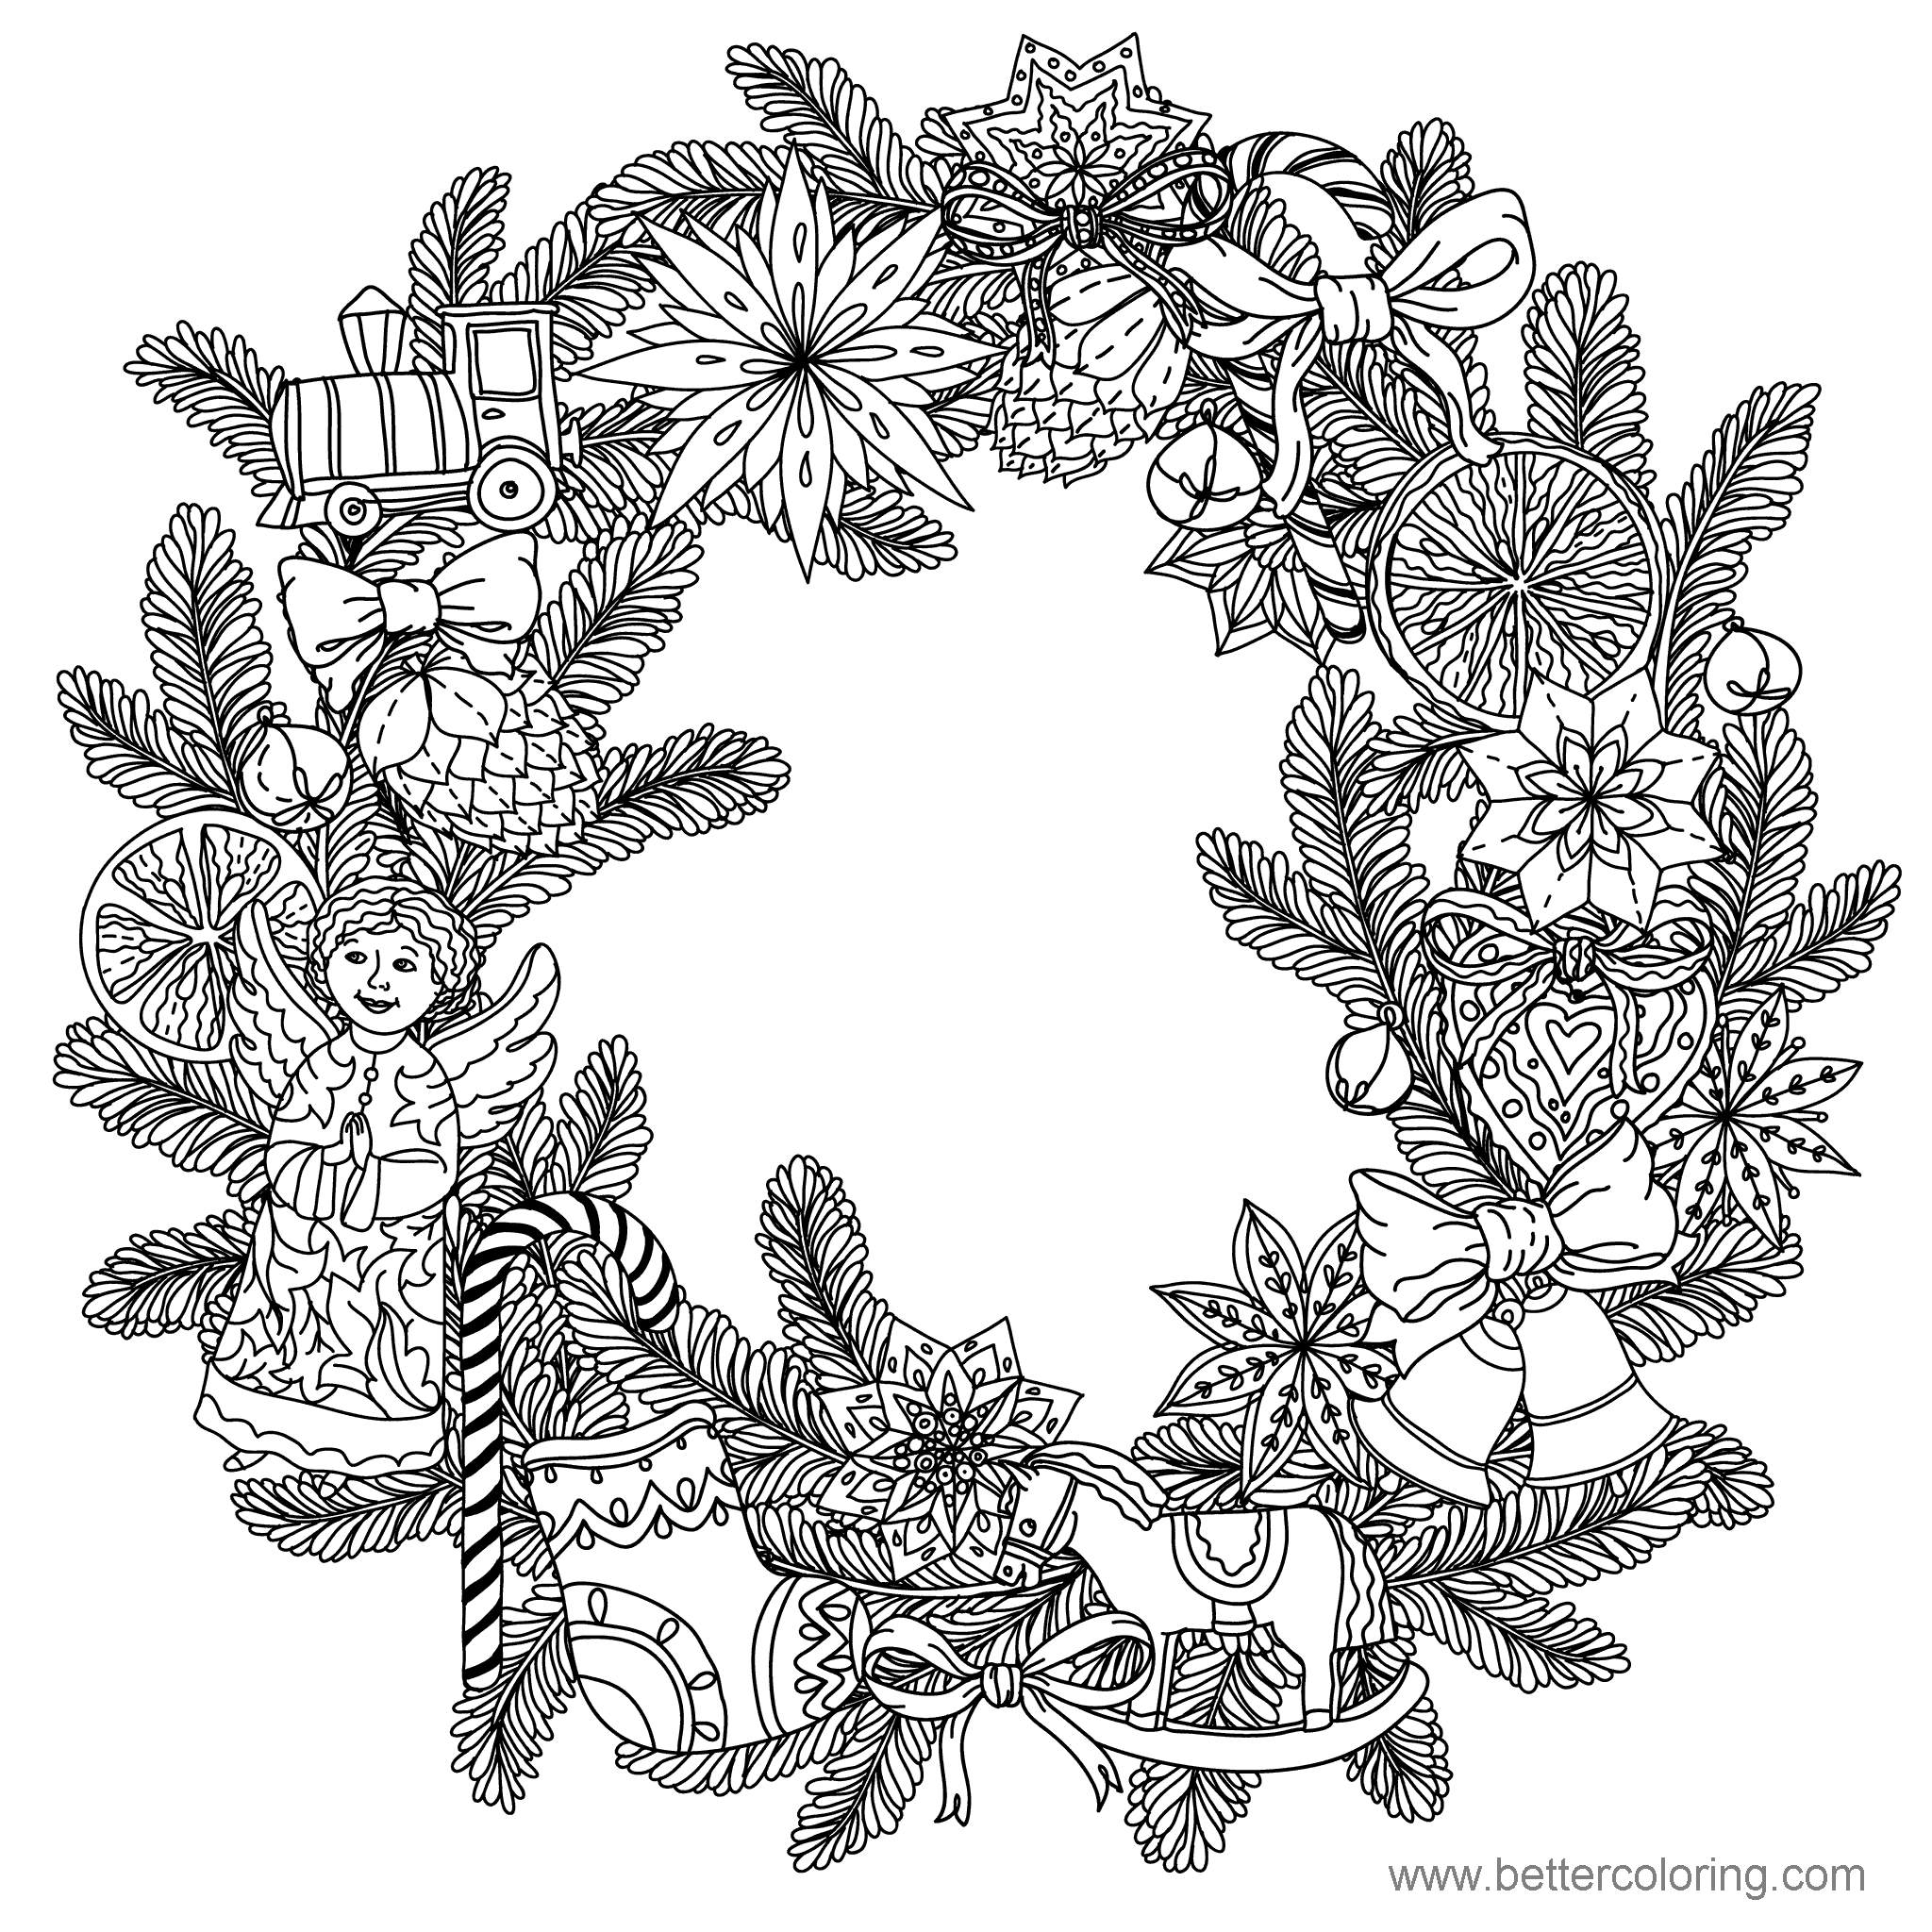 Detailed Christmas Wreath Coloring Pages - Free Printable Coloring Pages